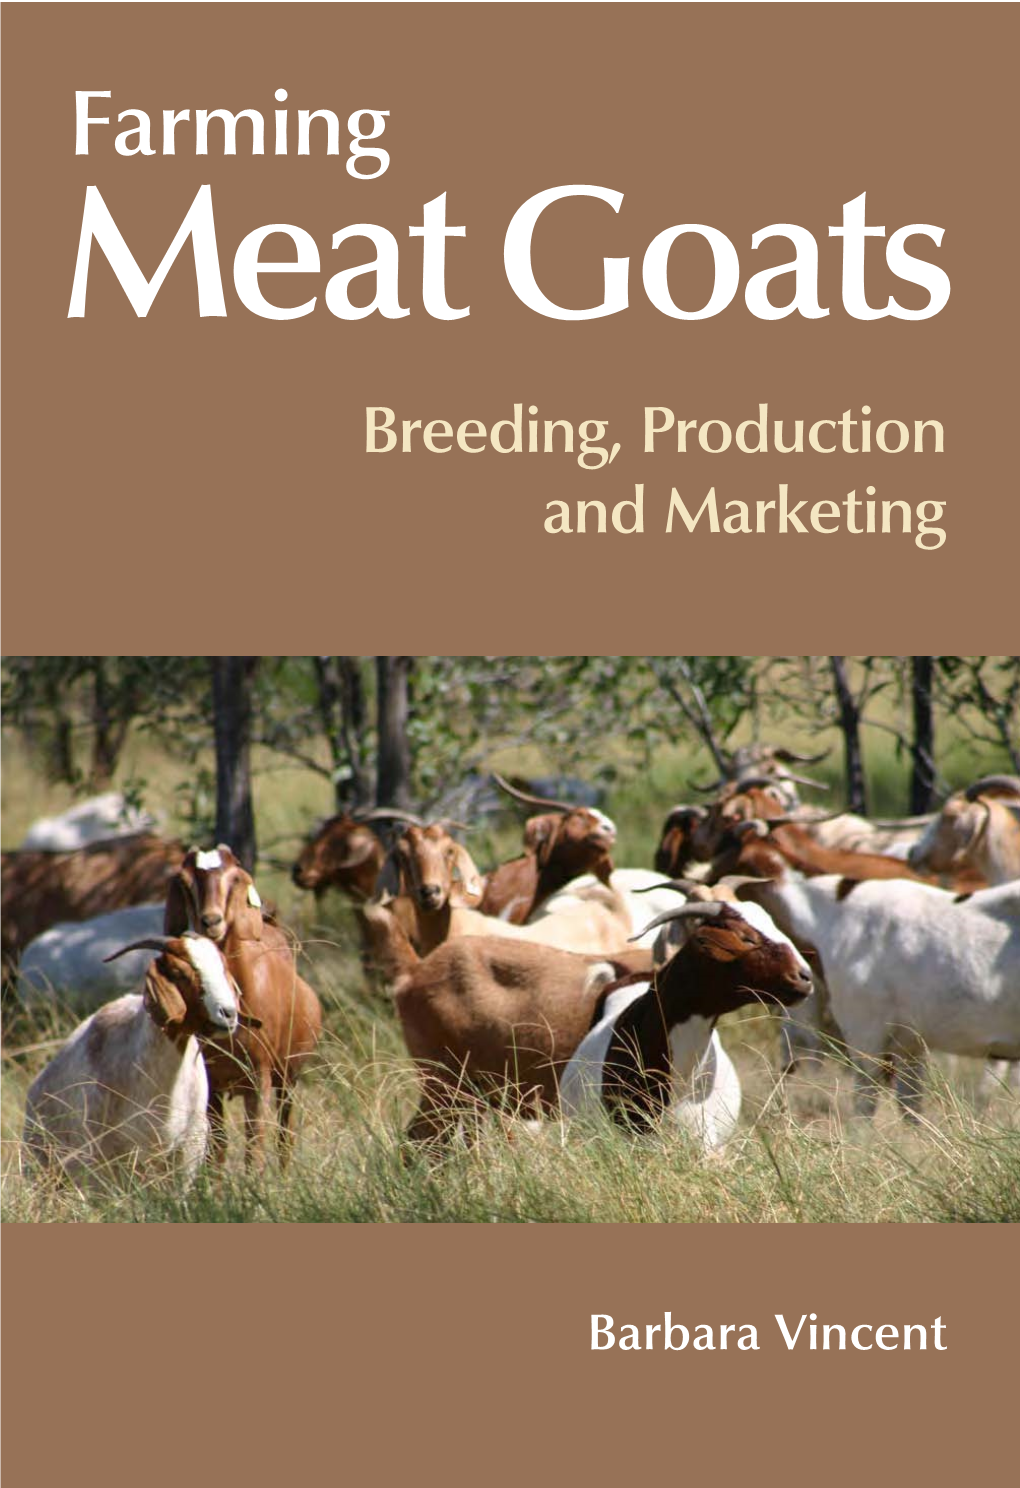 Calculating a Gross Margin for Sheep, Goat and Cattle Enterprises 3 Selecting and Preparing the Property 6